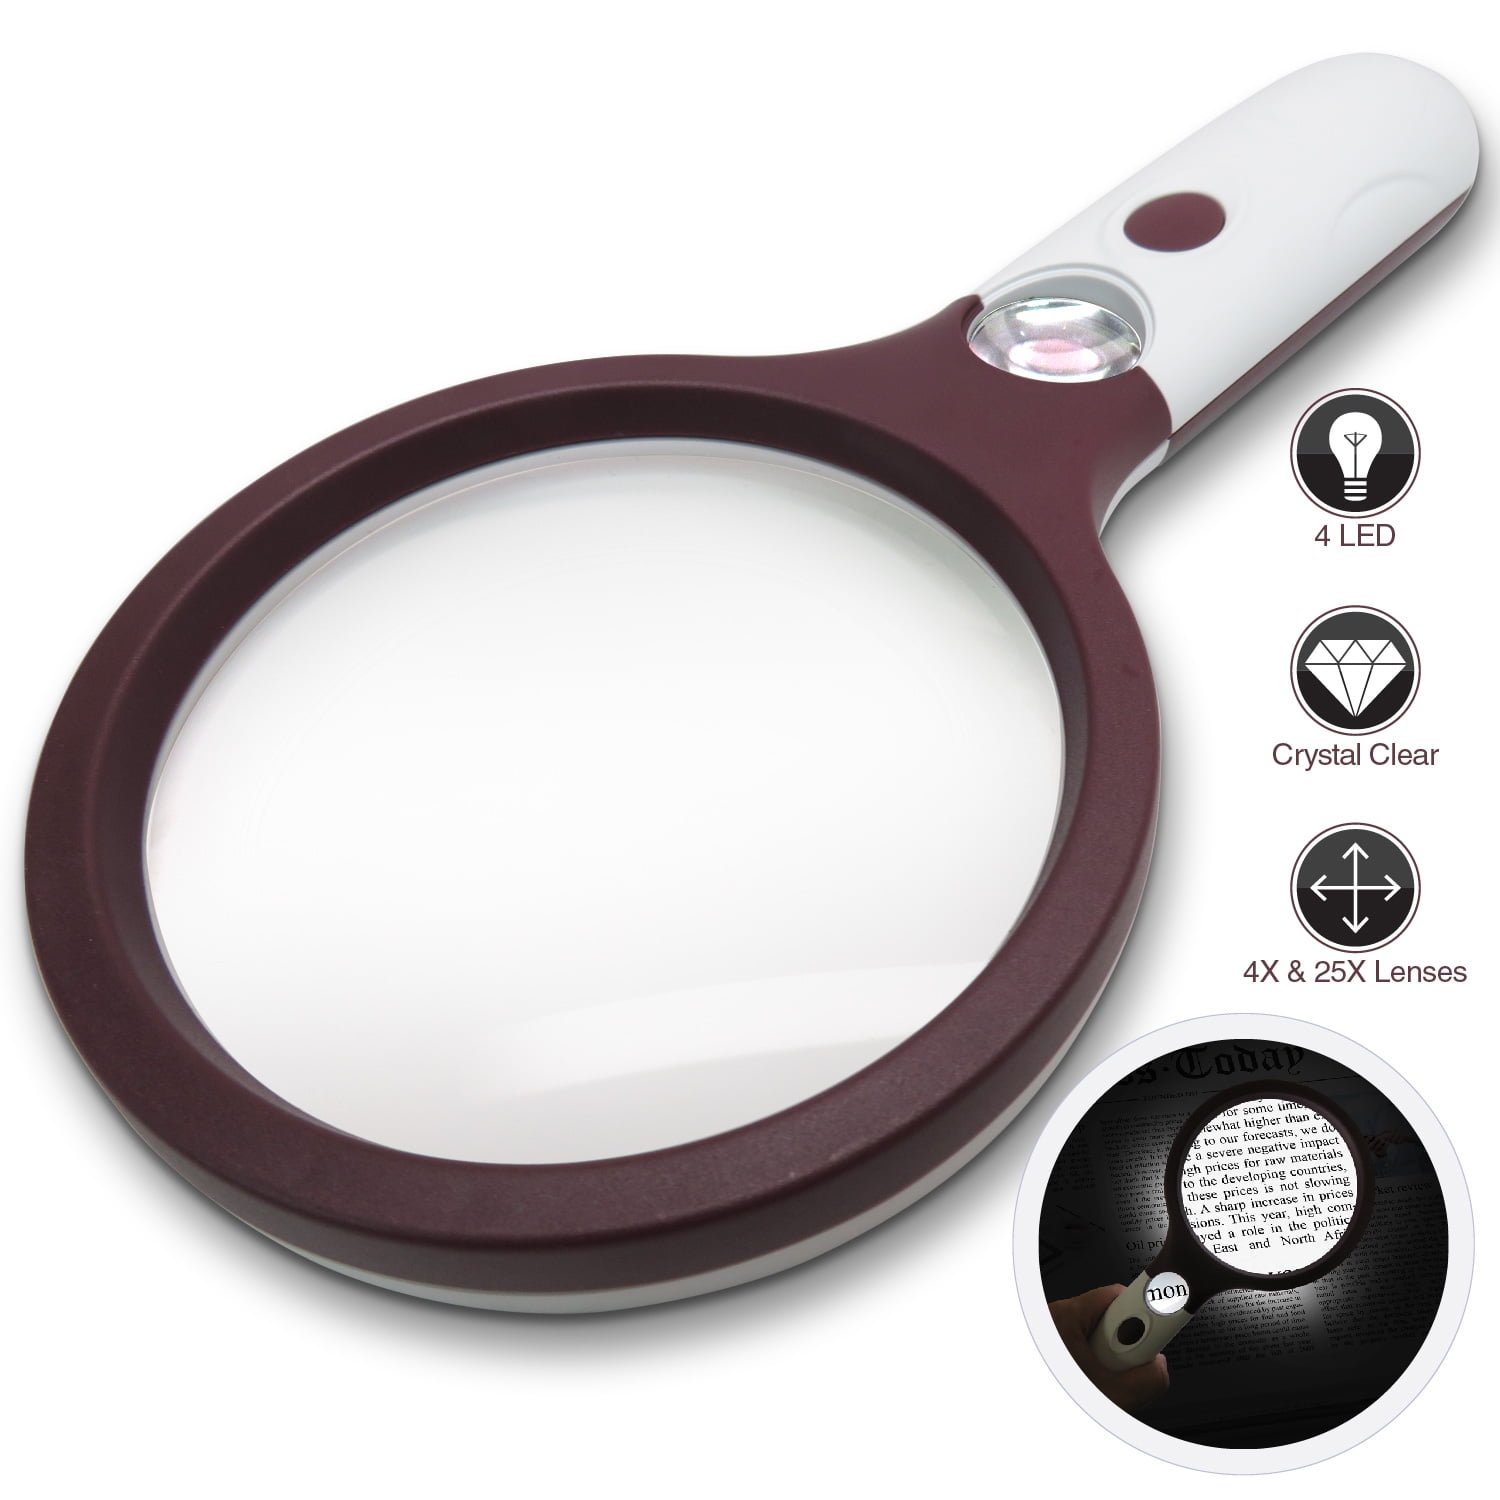 Large magnifying glass for reading